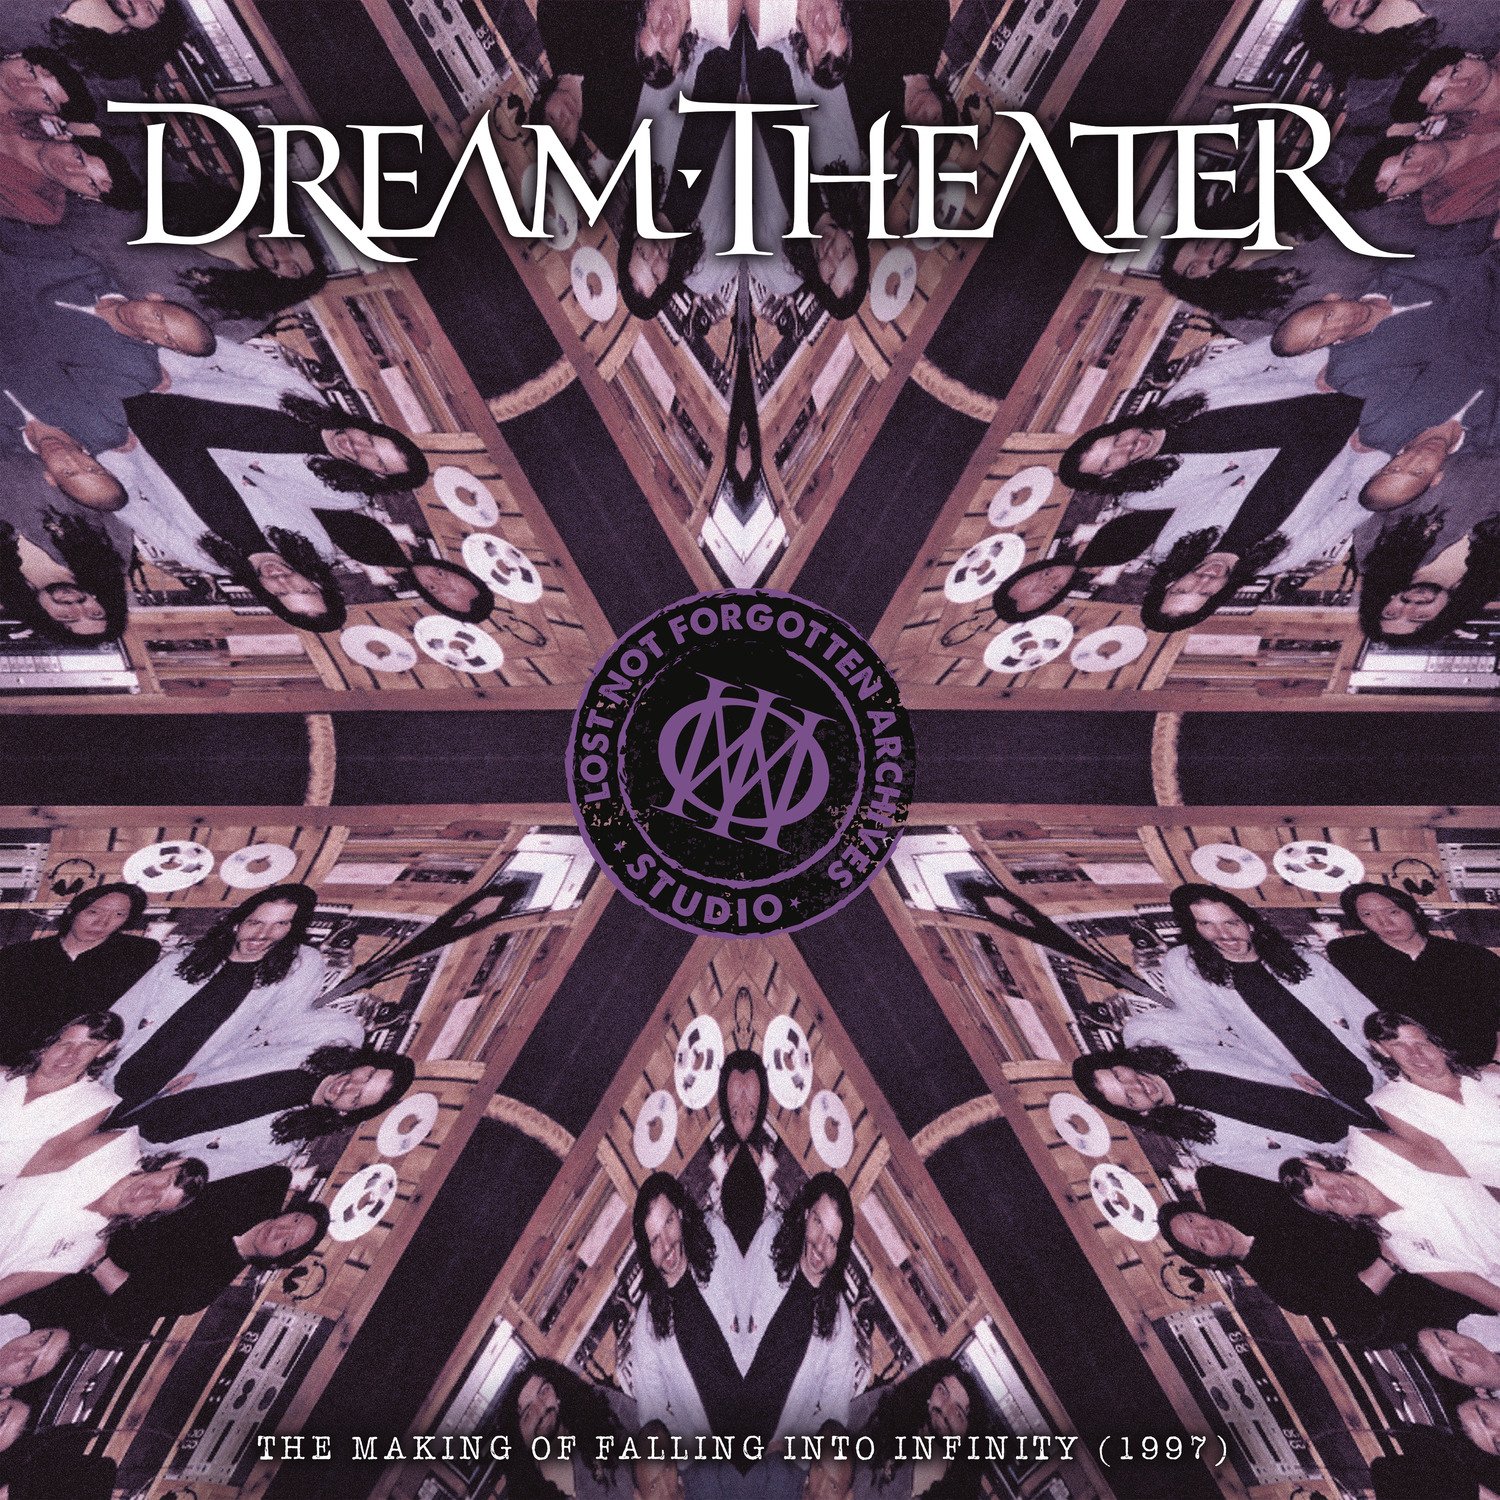 CD Shop - DREAM THEATER LOST NOT FORGOTTEN ARCHIVES: THE MAKING OF FALLING INTO INFINITY (1997) -SPEC-